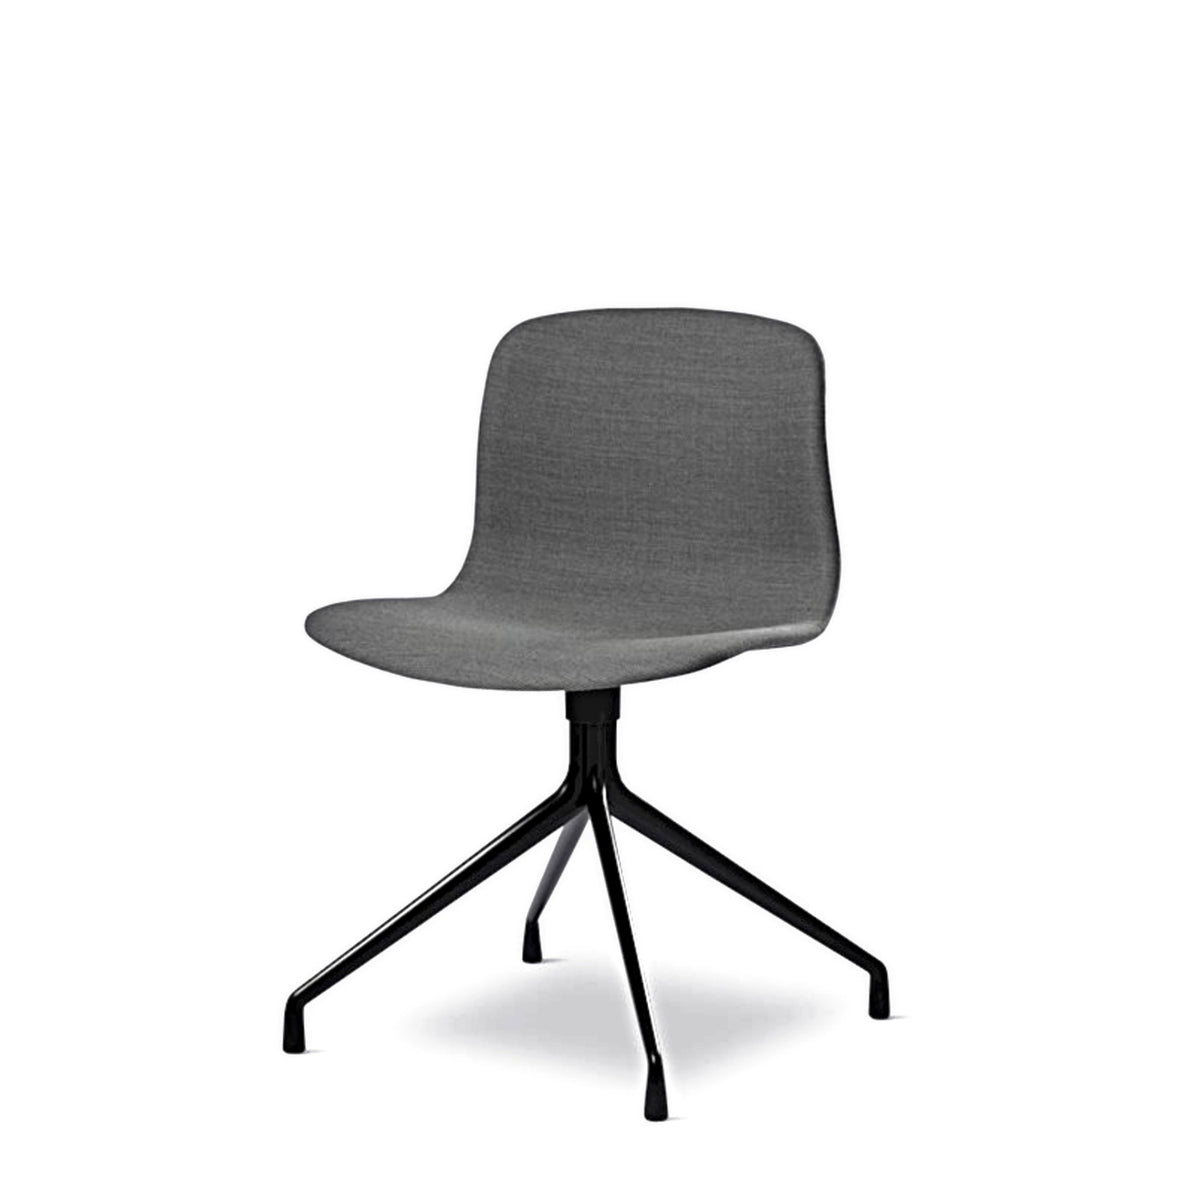 HAY About A Chair AAC11 Grey Steelcut Trio 0153 Chair with Black Powder Coated Base